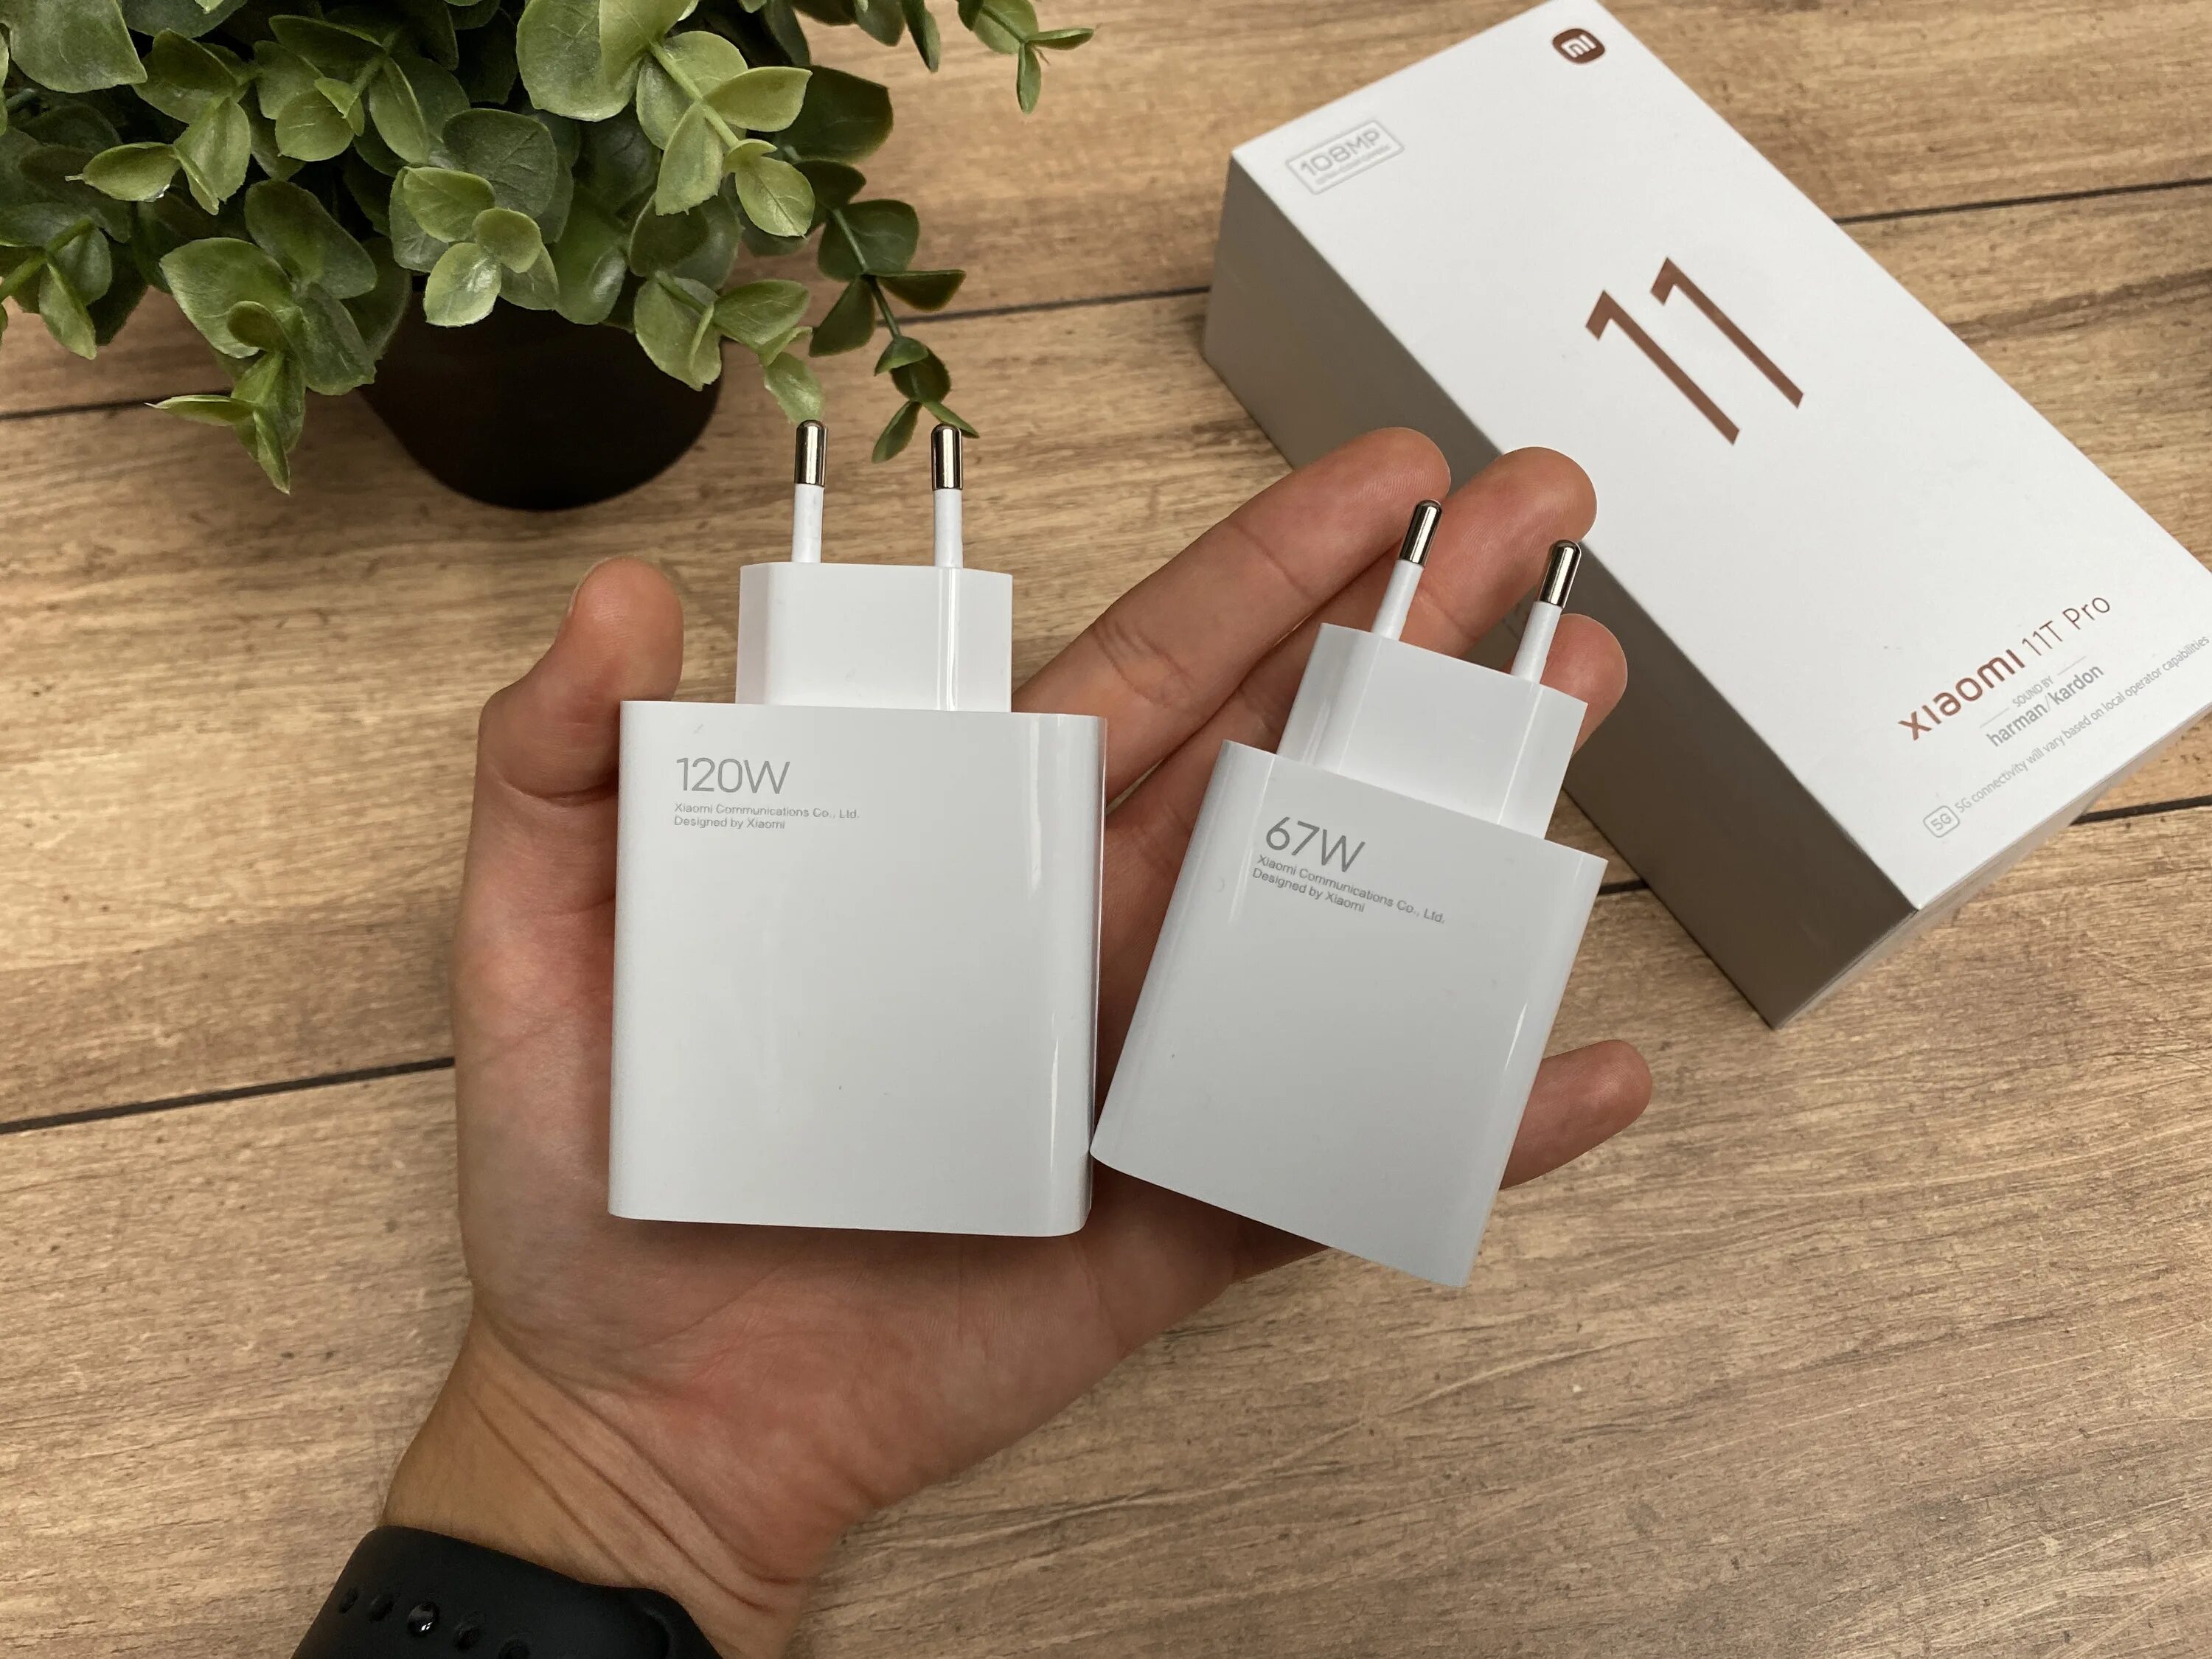 Note 11 pro зарядка. Xiaomi 120w Charger. Блок Xiaomi 120w. Сяоми зарядка 67w. Блок зарядки Xiaomi 67w.